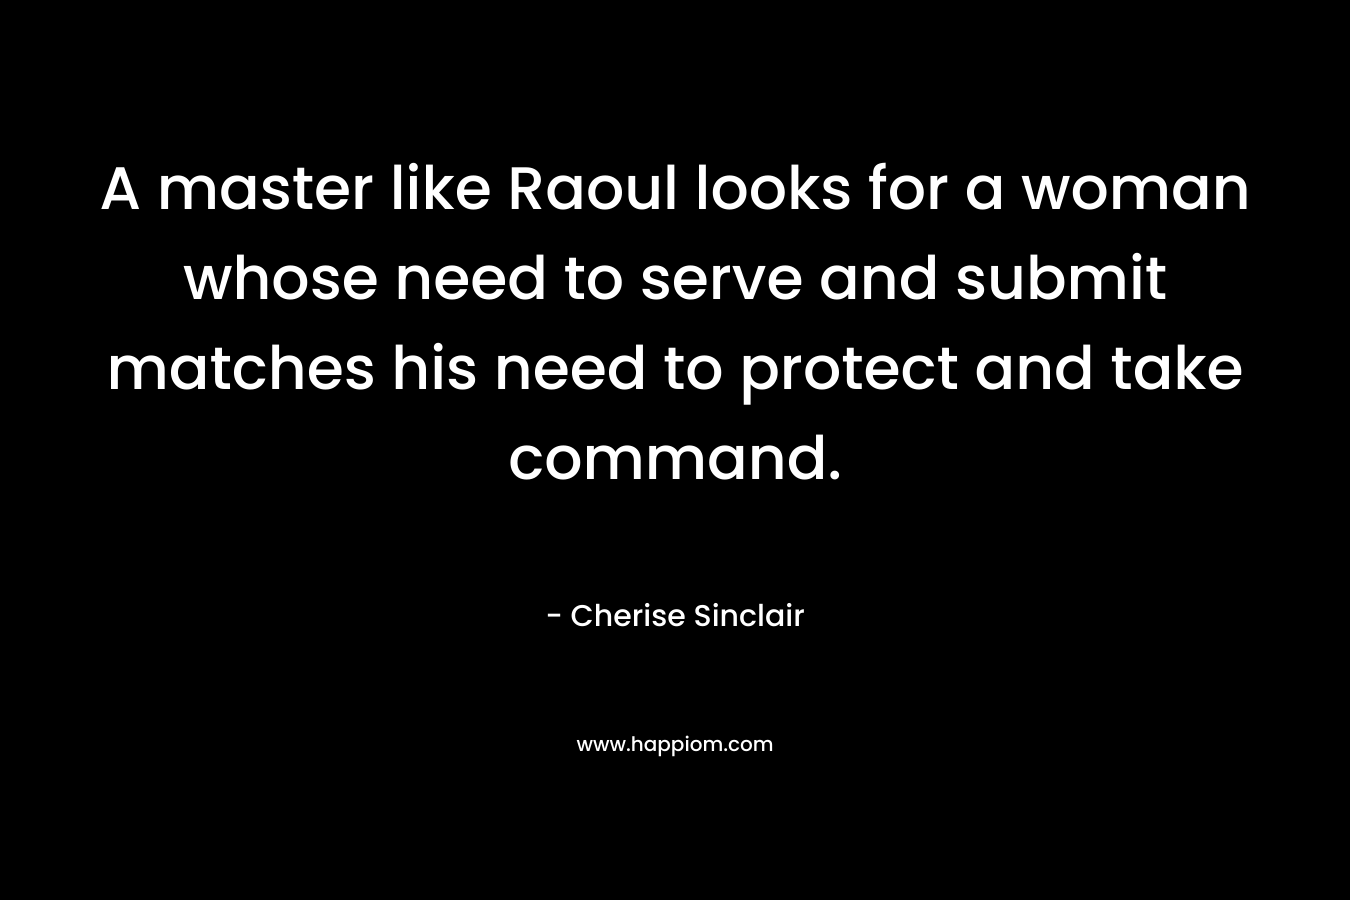 A master like Raoul looks for a woman whose need to serve and submit matches his need to protect and take command. – Cherise Sinclair